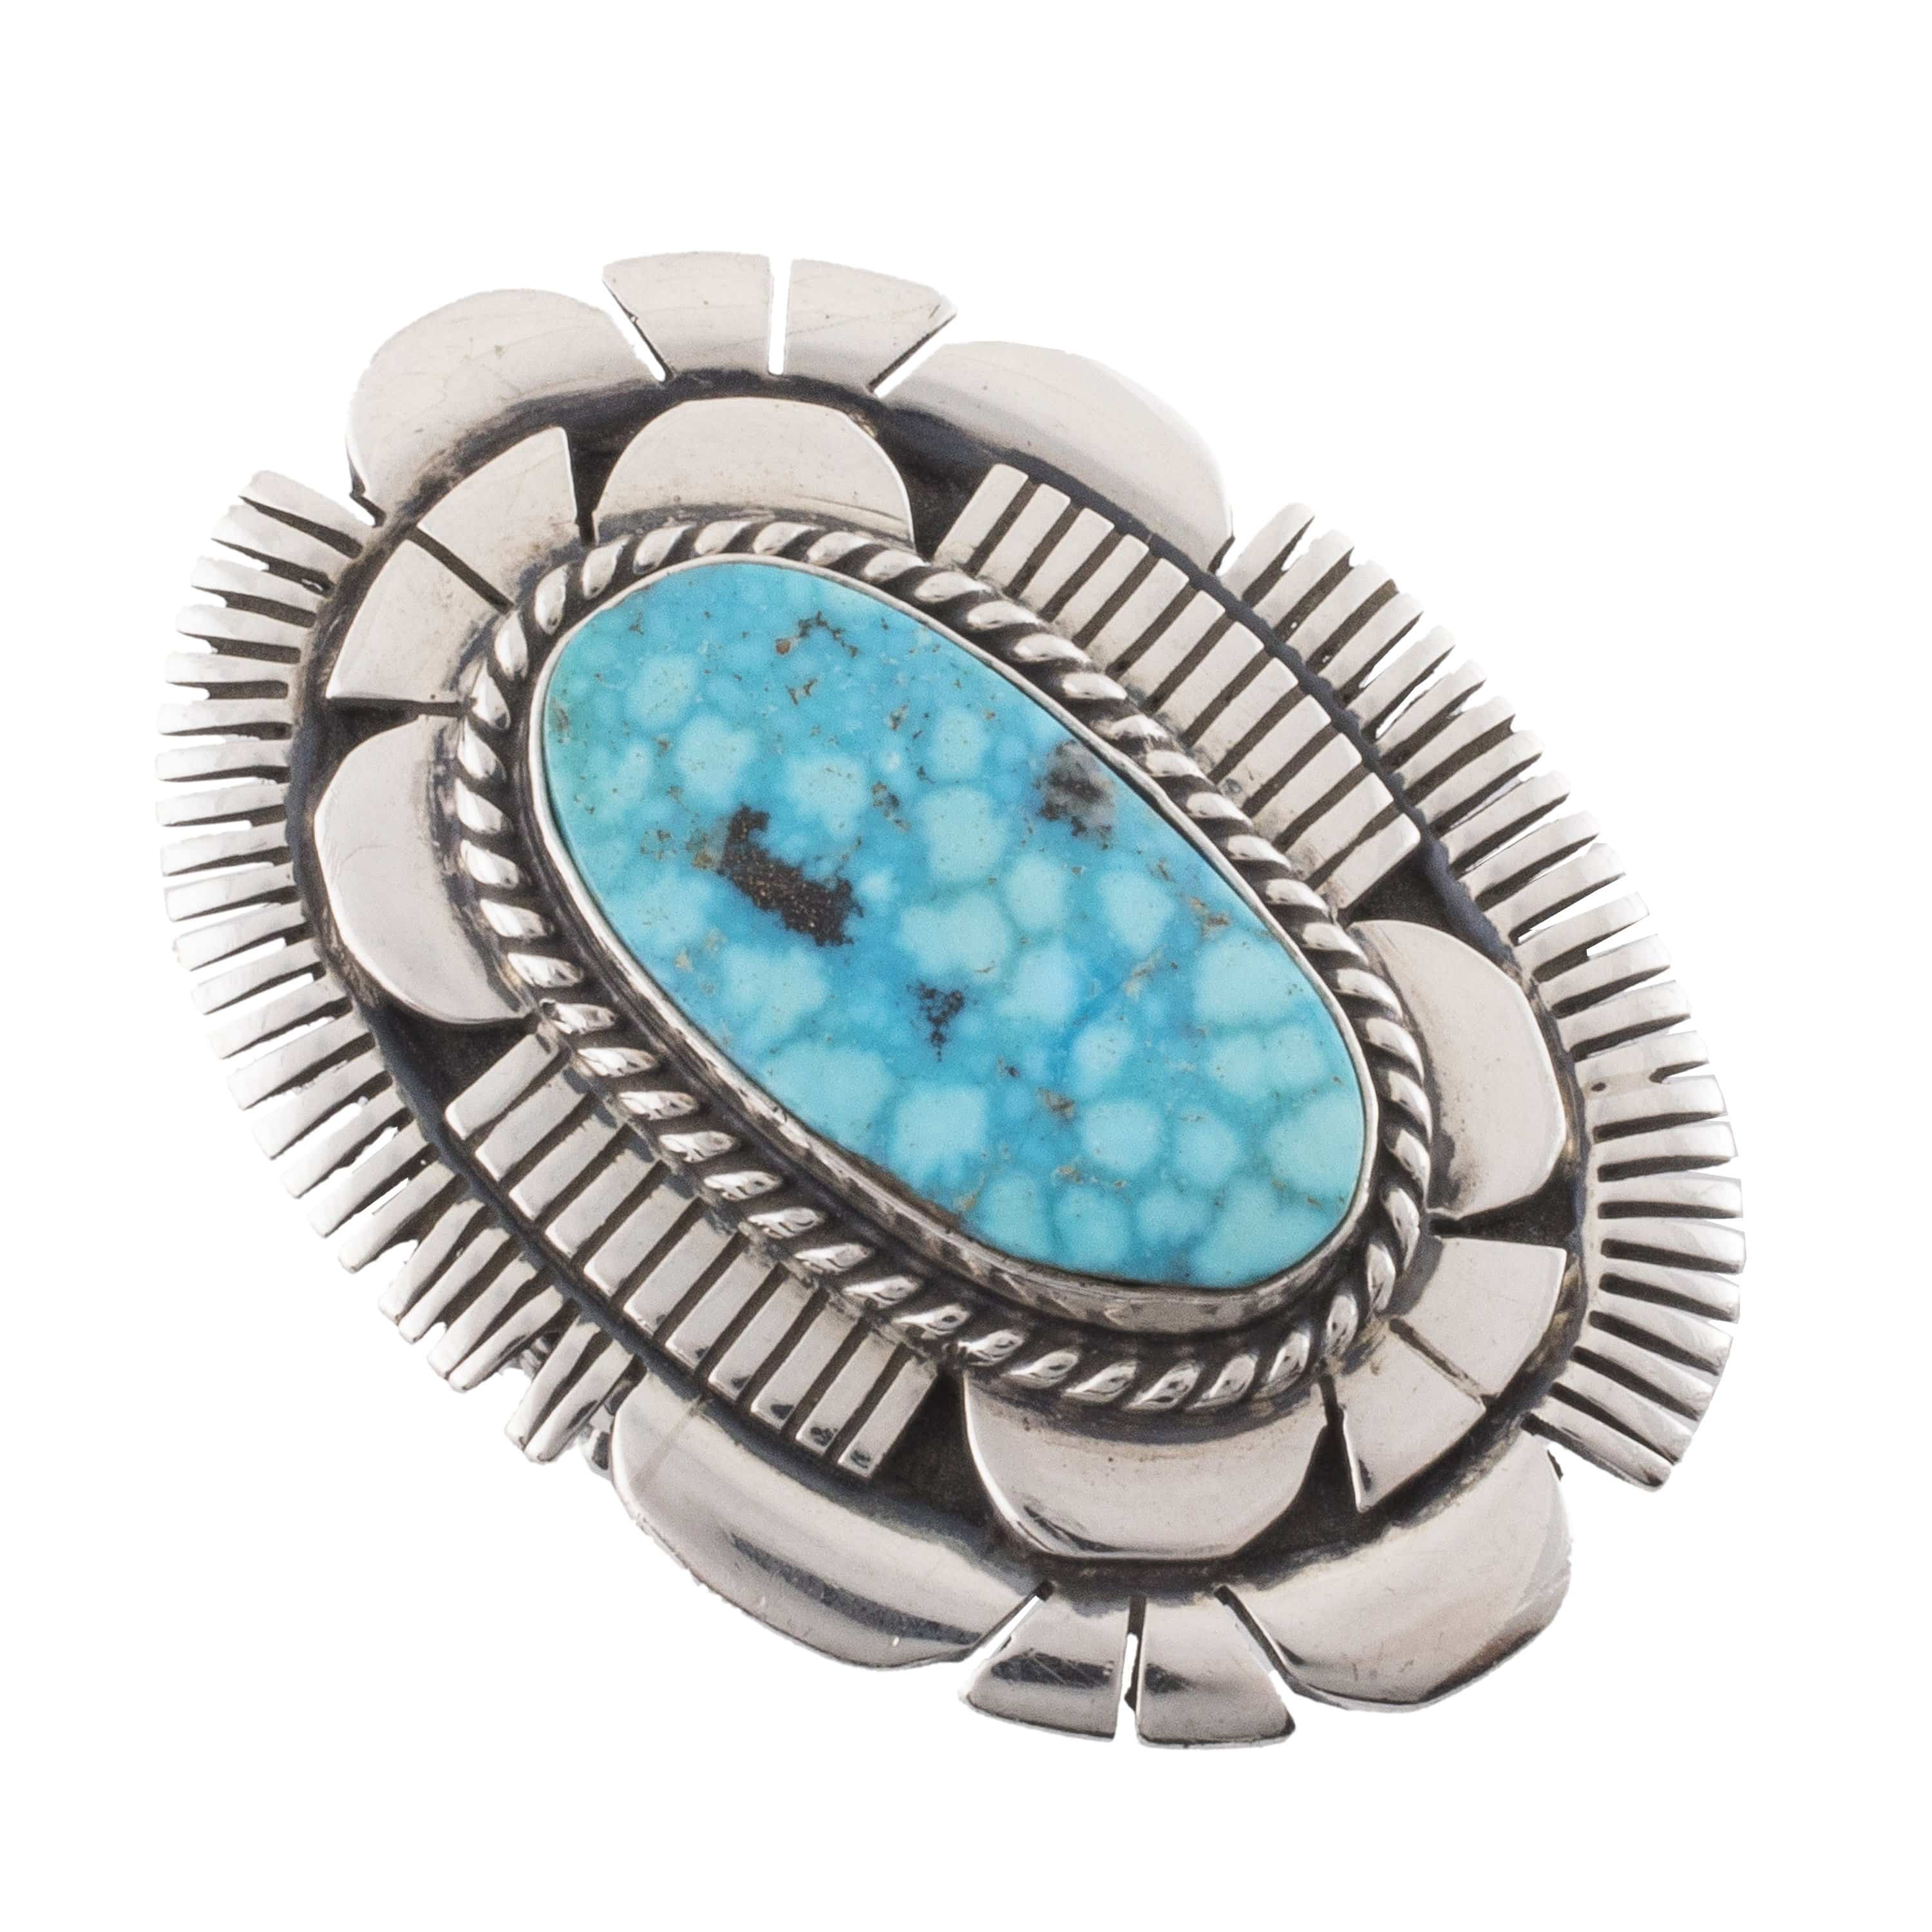 Kalifano Native American Jewelry 8 Russell Sam Kingman Turquoise USA Native American Made 925 Sterling Silver Ring NAR800.017.8